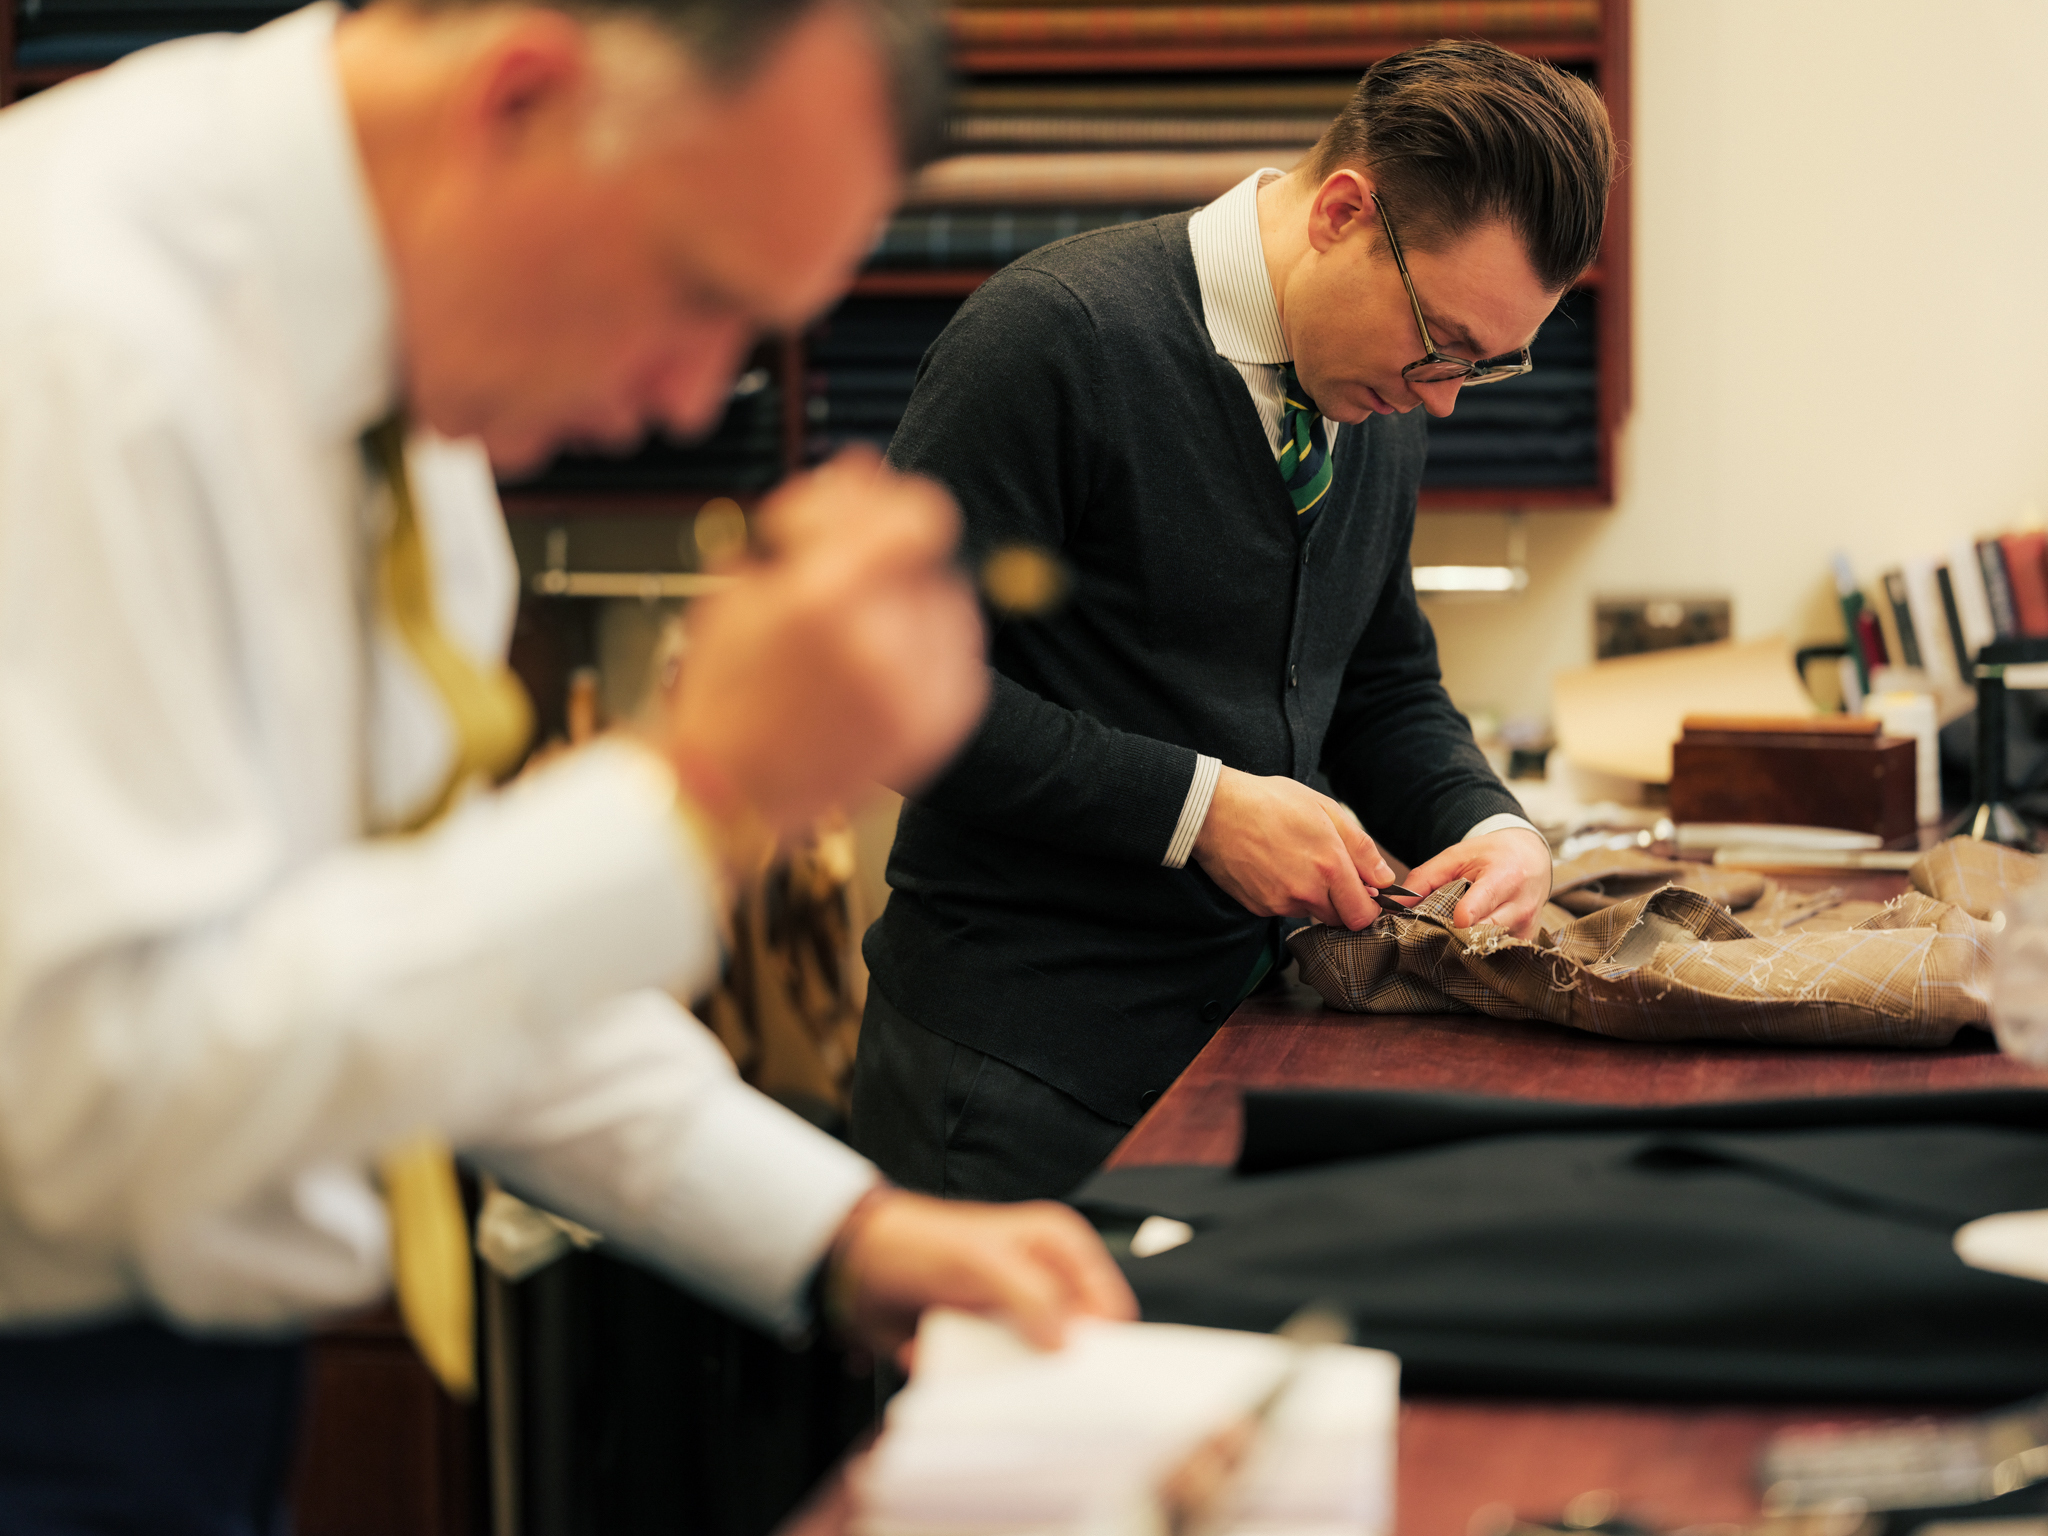 Luxury shopping in the City - tailors at work 